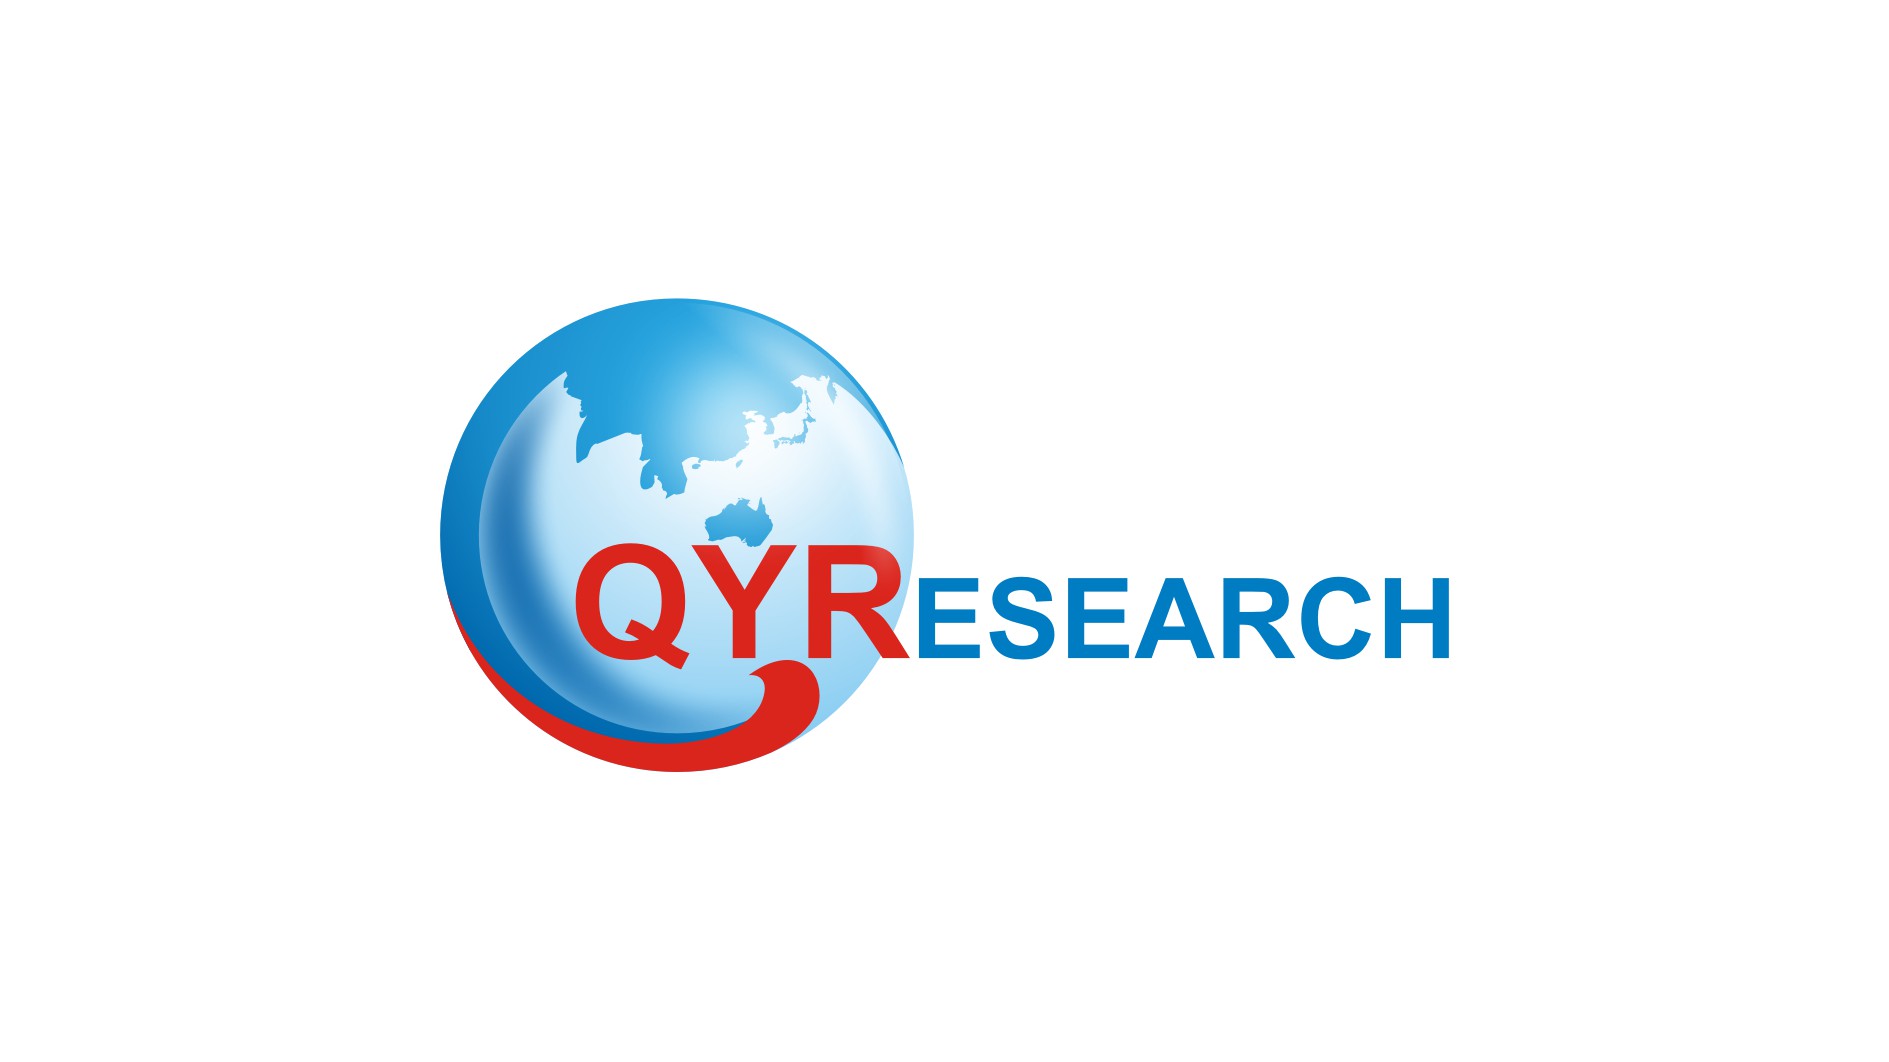 Global Mask Alignment Systems market 2019 – 2025 analysis scrutinized in new research